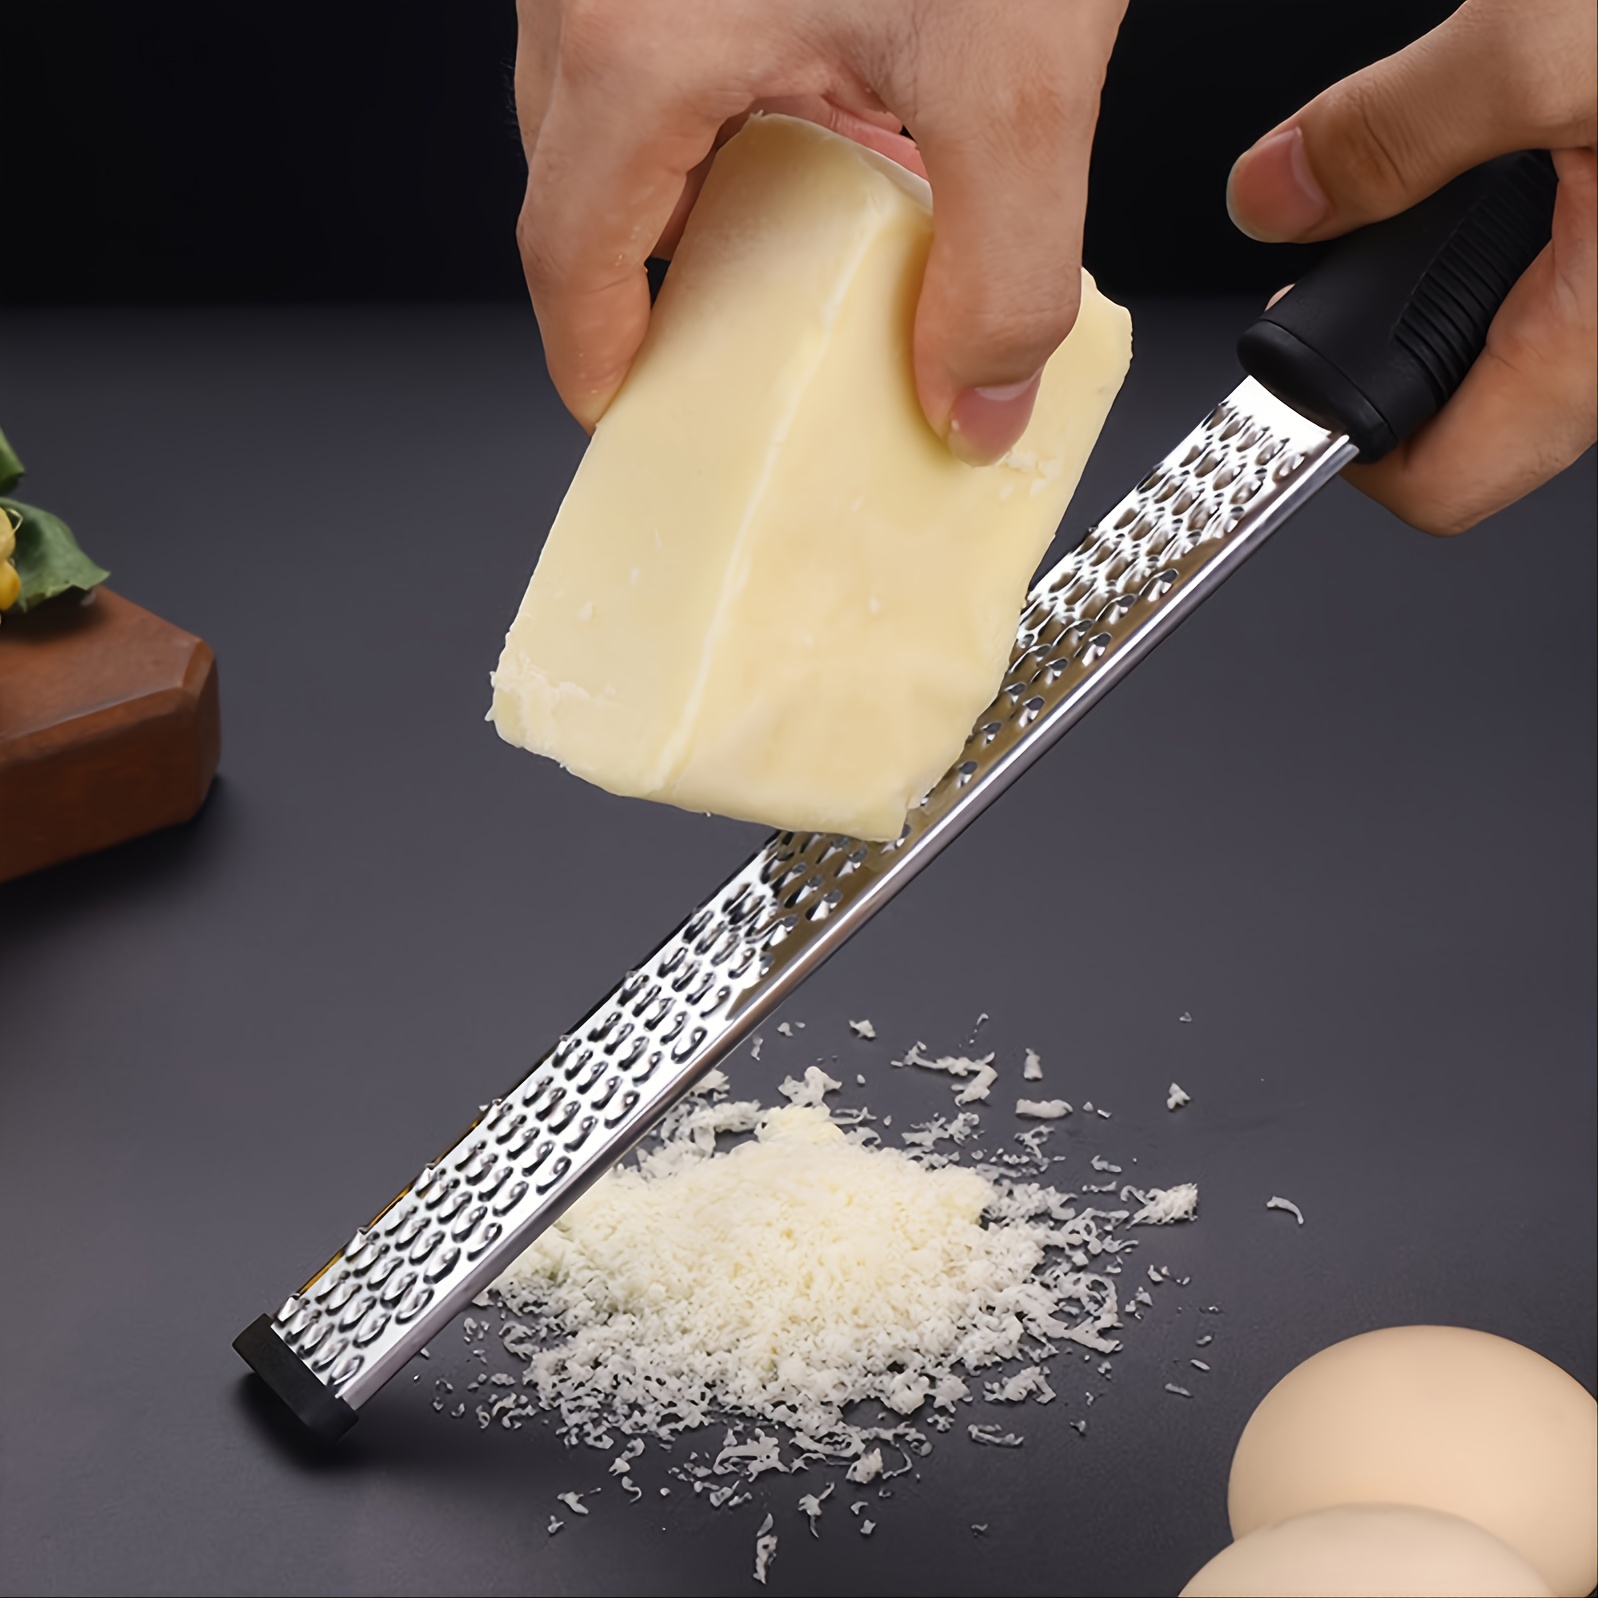 Get Your Kitchen Game On with the Ultimate Handheld Cheese Grater & Zester